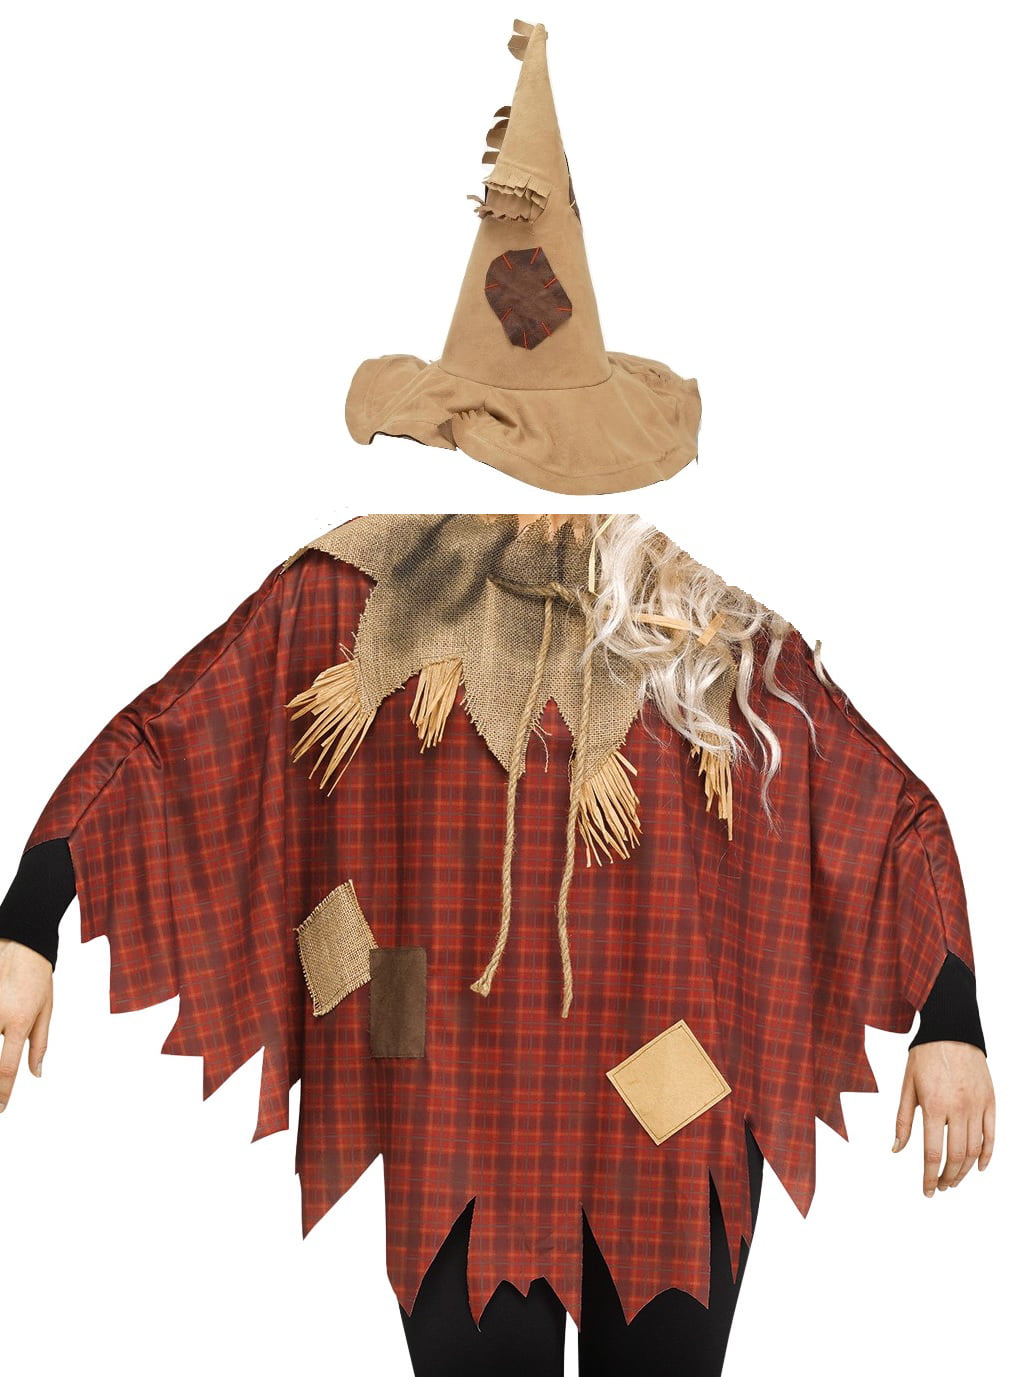 Womens Scary Scarecrow Hat And Poncho Costume Set, Multi, One Size